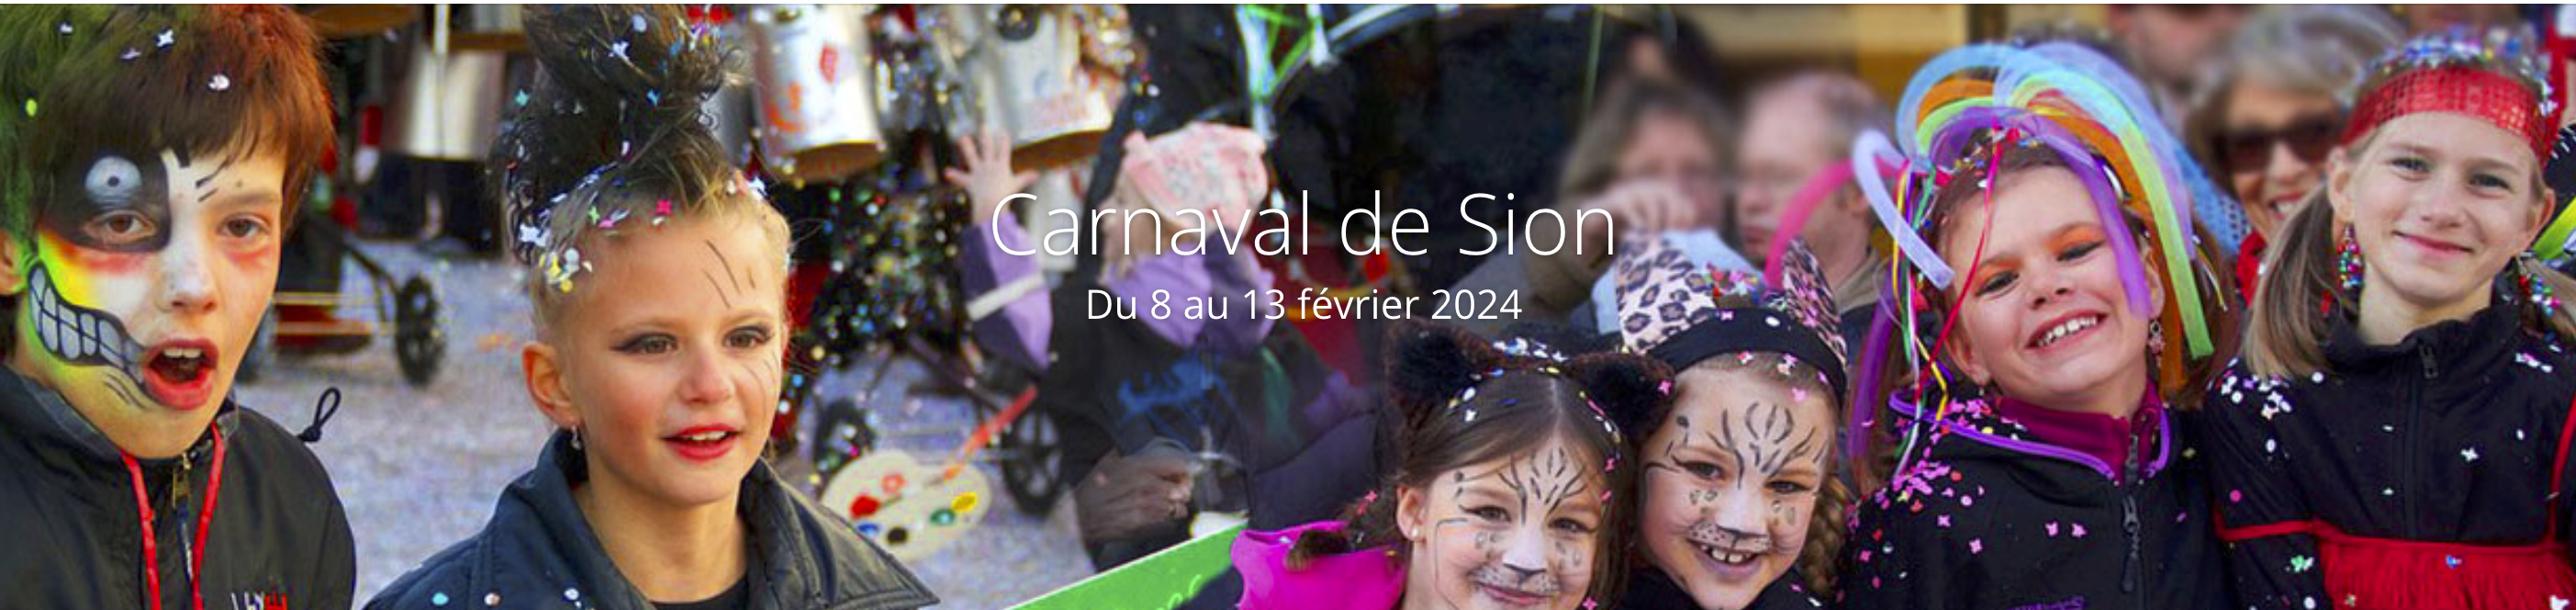 Carnaval Sion.png